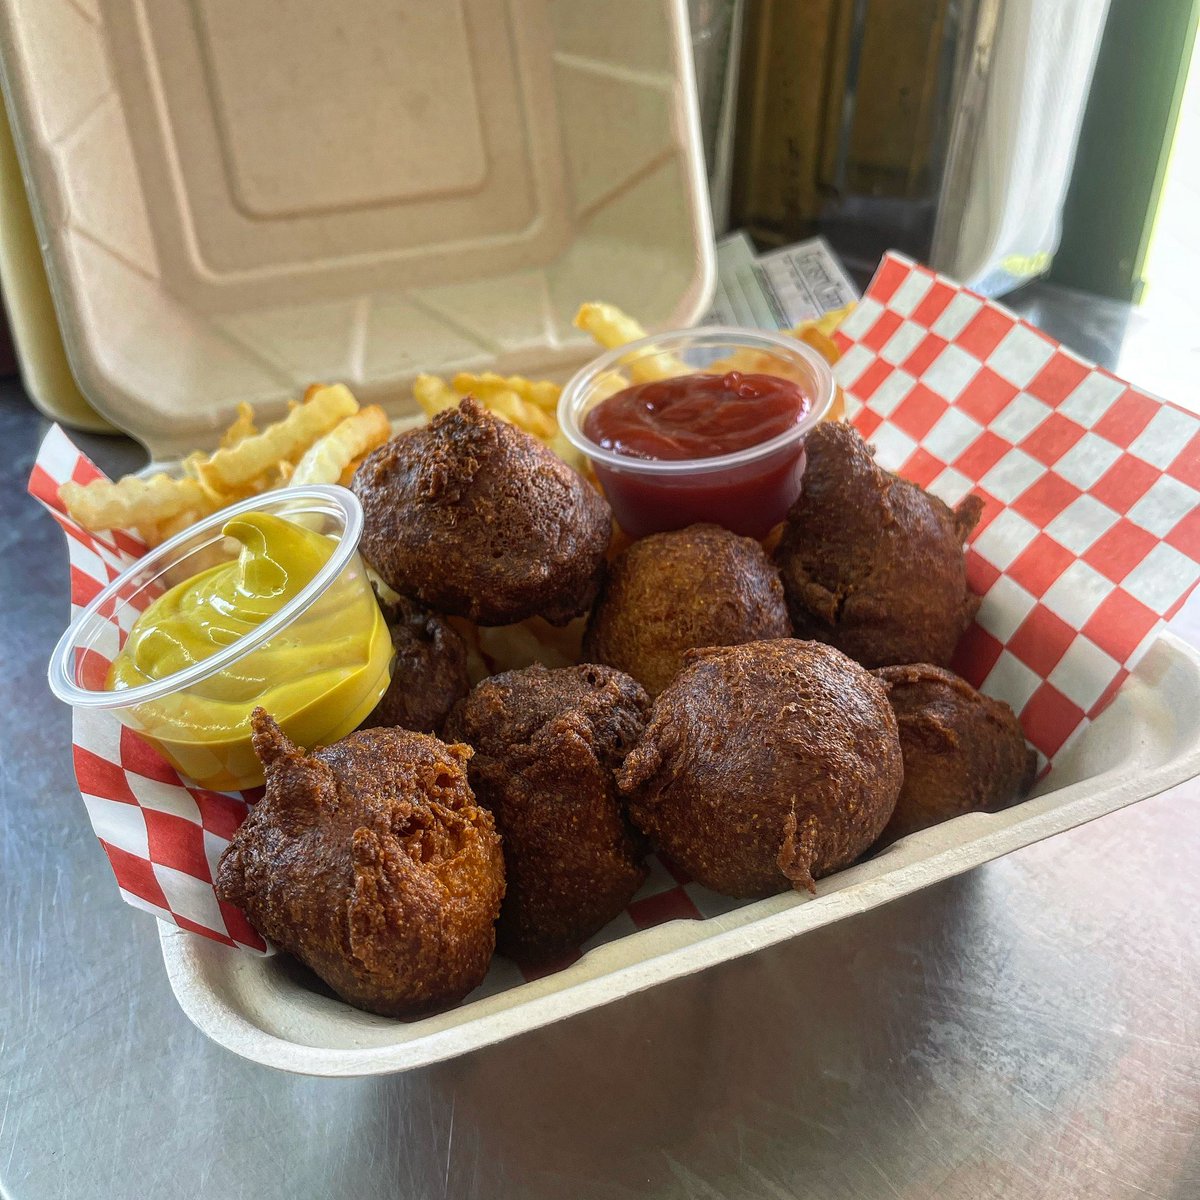 Batter Up Truck is at Spark Social SF for brunch today. Beautiful day to enjoy with a corndog! 
.
.
.
.
.
#batterupsf #batteruptruck #corndog #bitesize #fresh #sparksocialsf #sundayfunday #sfeats #bayareafoodie #togo #crinklecut #nomnom #betterthandisneyland